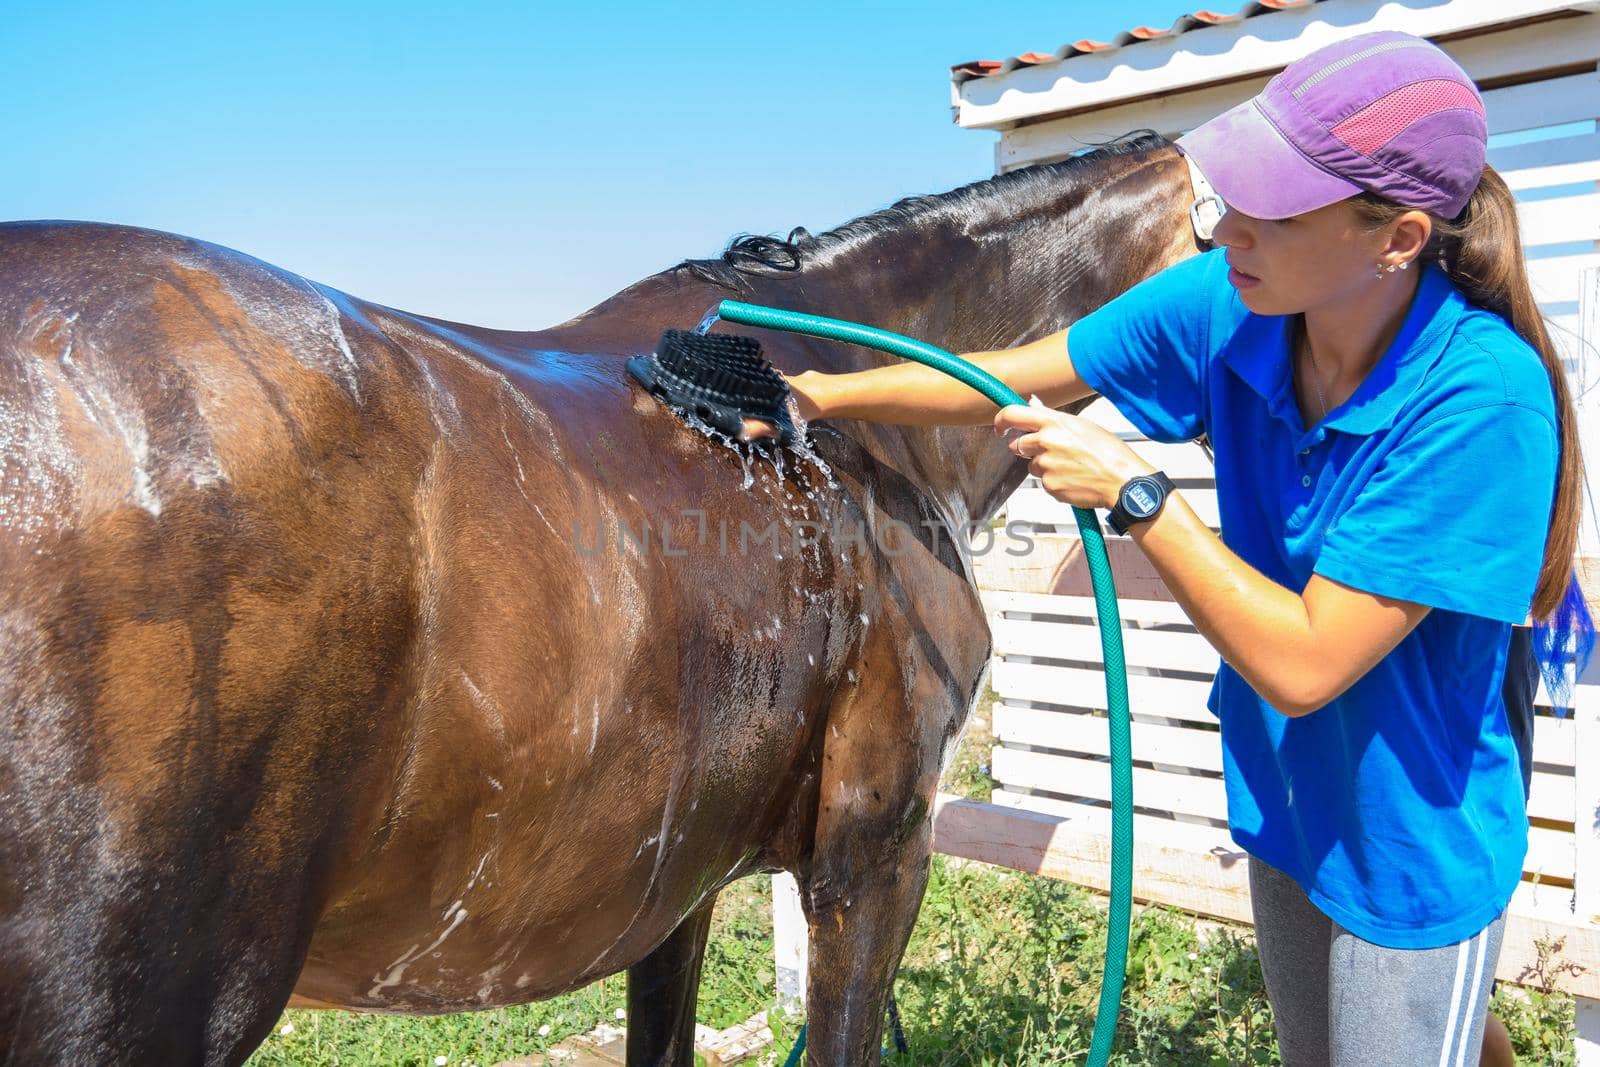 The girl thoroughly washes the horse with a special brush and pours water from a hose